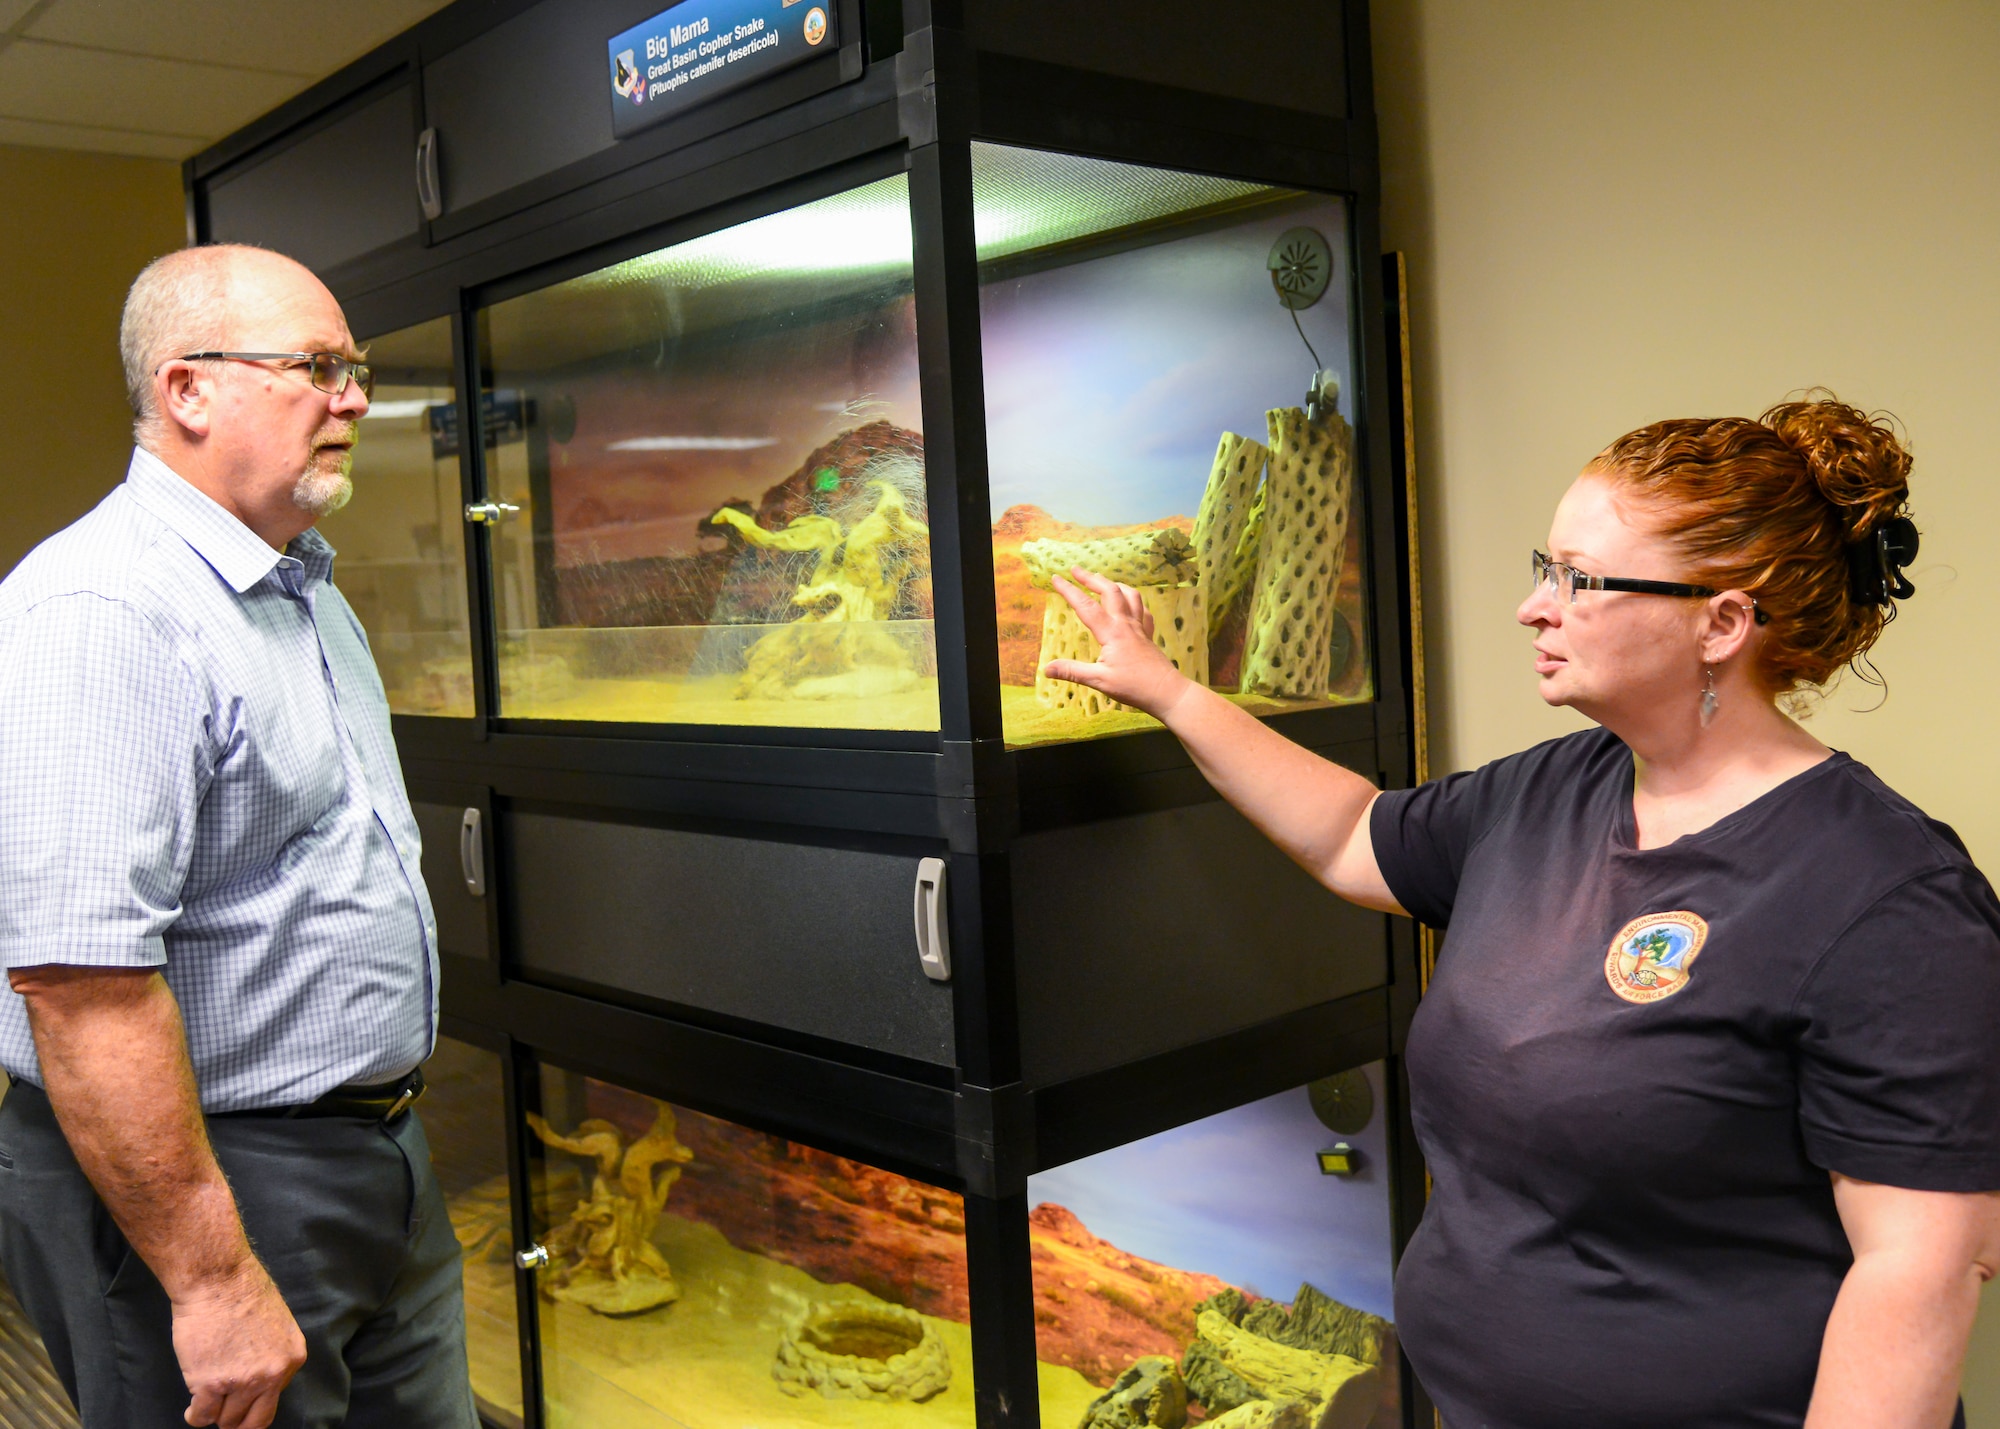 Herb Roraback, chief of Environmental Management and Misty Hailstone, a biologist in EM, discuss the scratches that Kali, the desert tortoise, left on the walls of a terrarium in EM, where she was kept briefly to recuperate after being hit by a car. (Air Force photo by Gary Hatch)